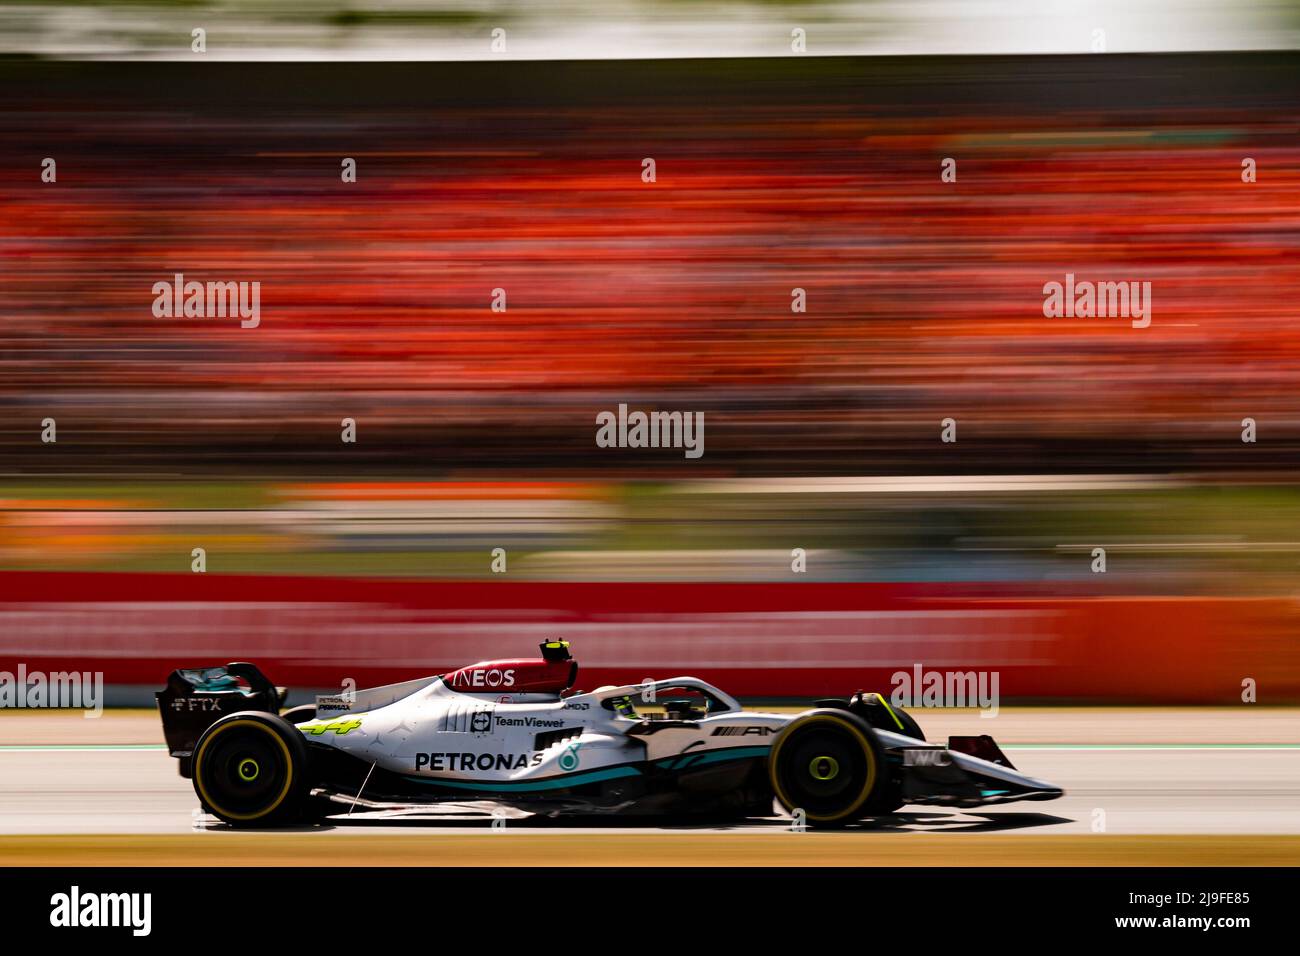 Barcelona, Spain. 22nd May, 2022. Lewis Hamilton of Great Britain and Mercedes drives his W13 during the F1 Grand Prix of Spain at Circuit de Barcelona-Catalunya on May 22, 2022 in Barcelona, Spain. Foto: Siu Wu. Credit: dpa/Alamy Live News Stock Photo